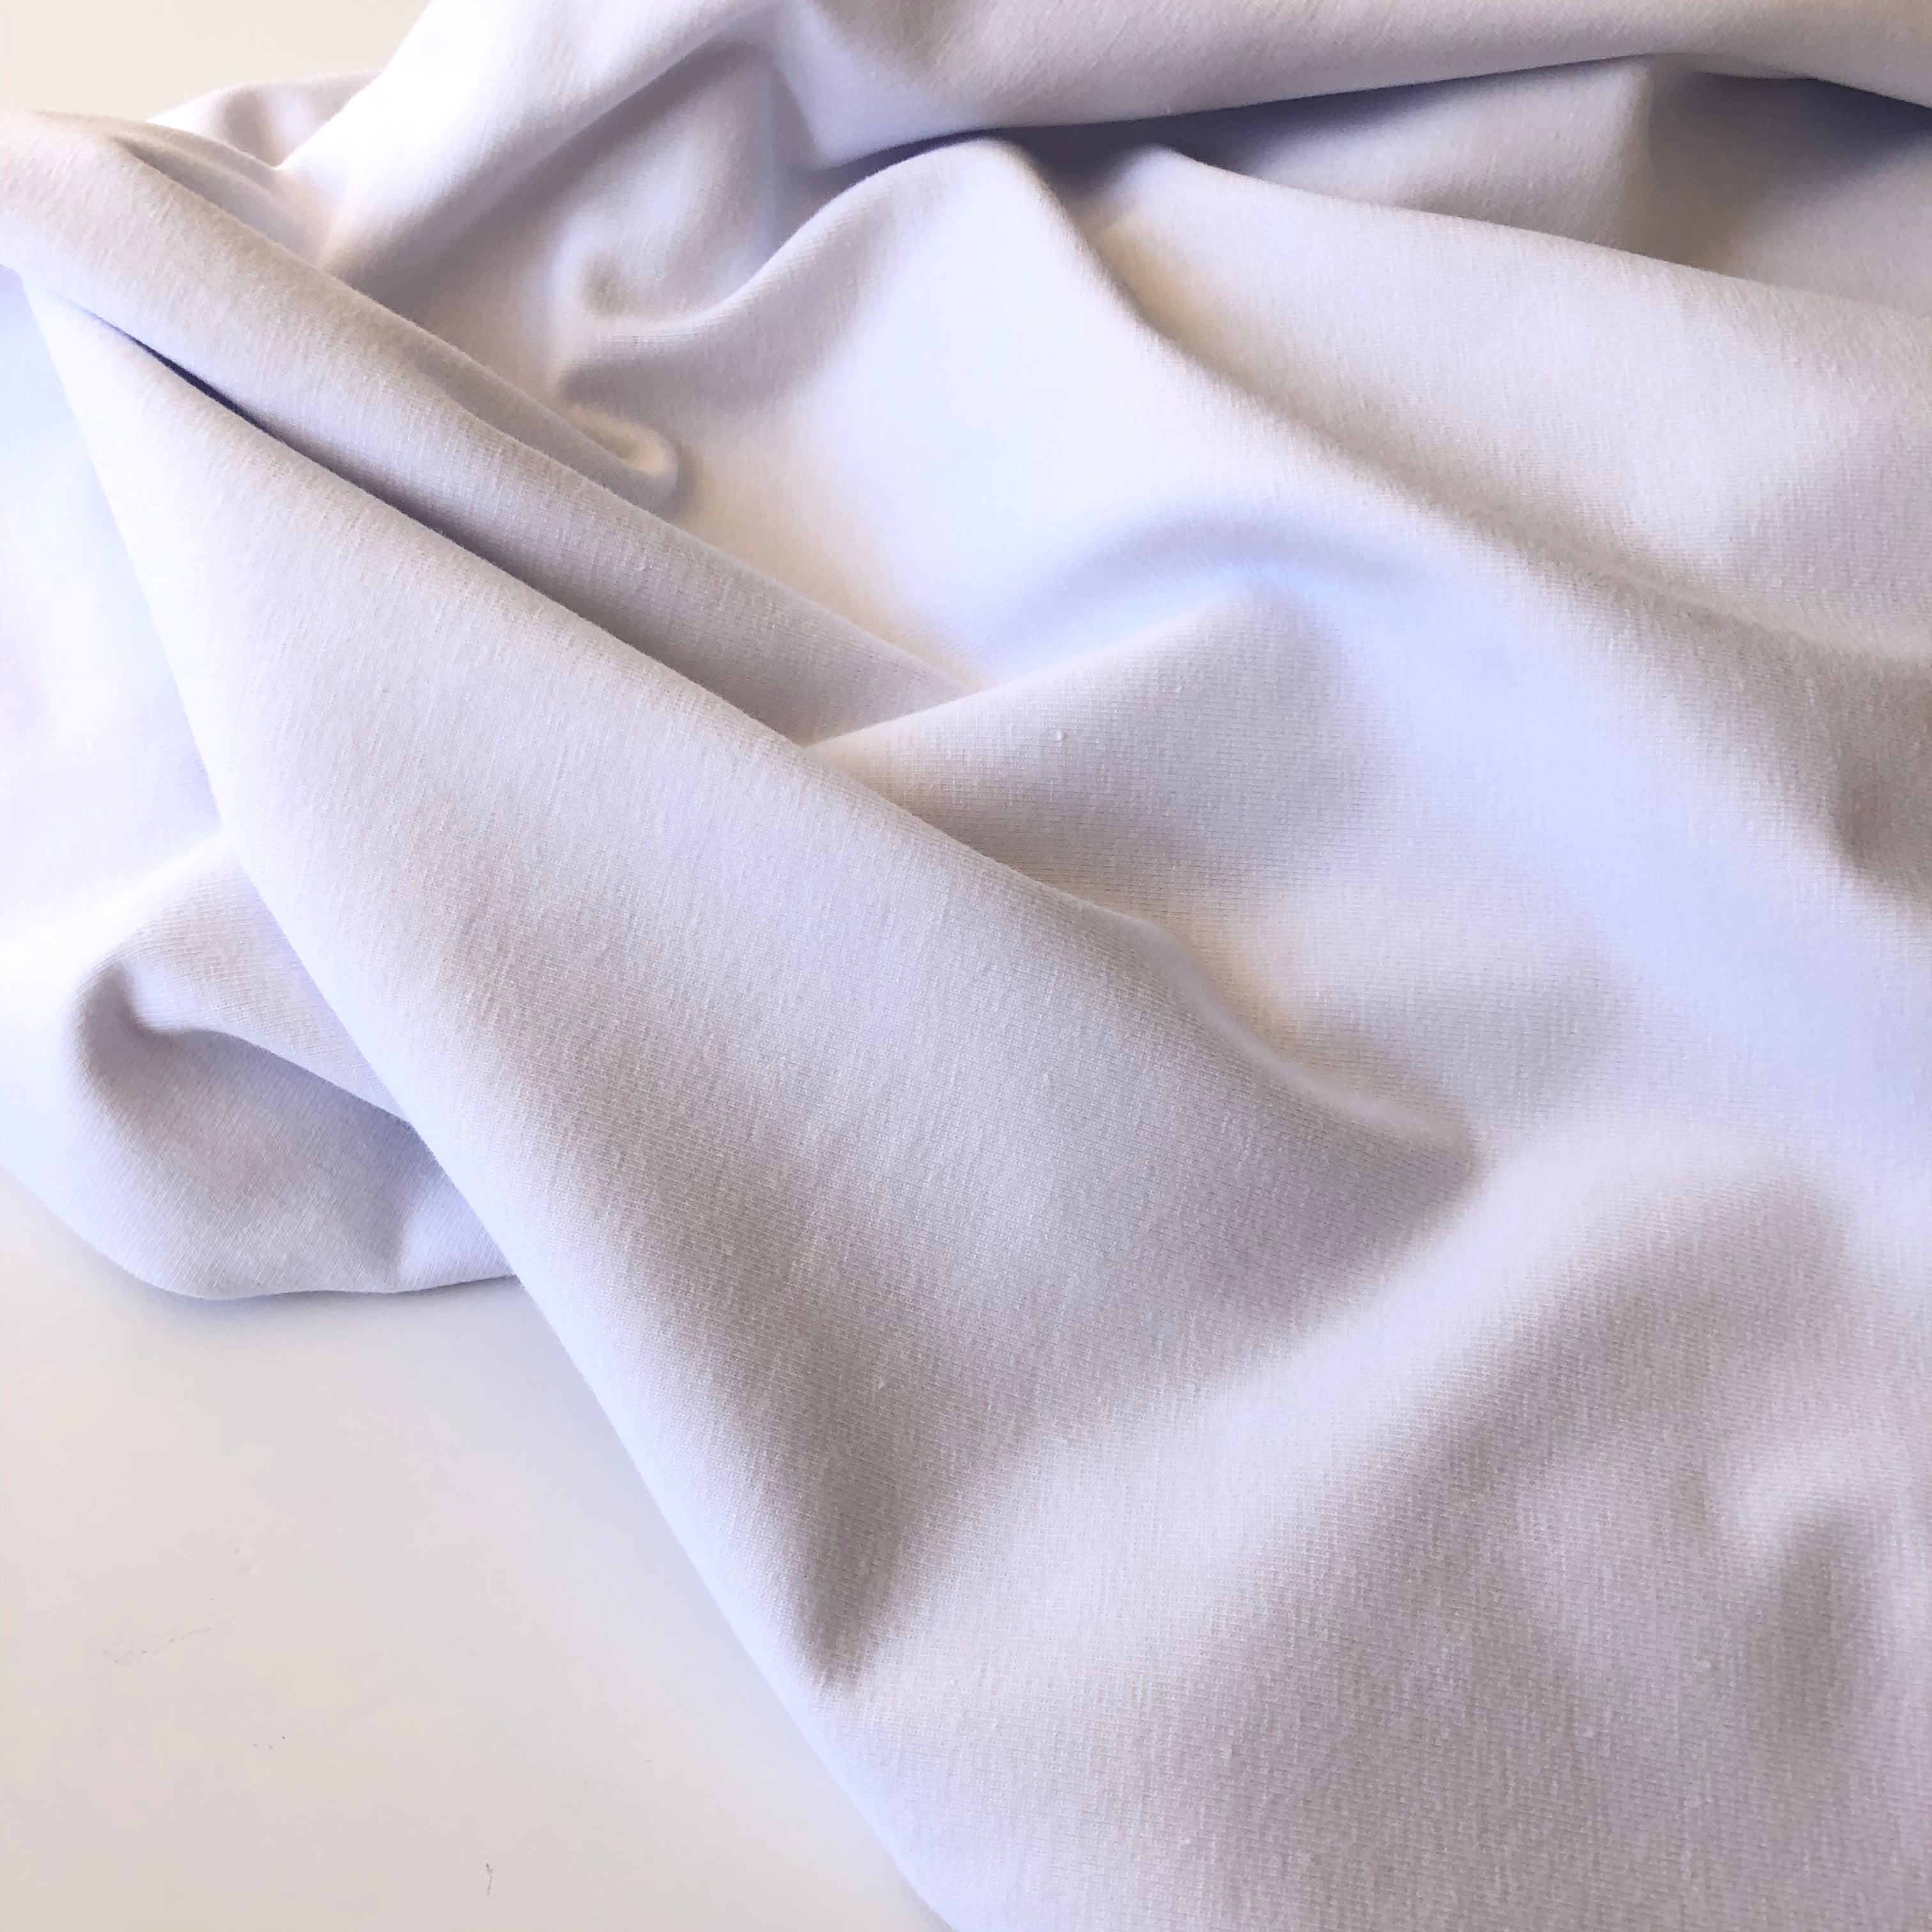 (with dirt marks in places) Essential Chic White Plain Cotton Jersey Fabric